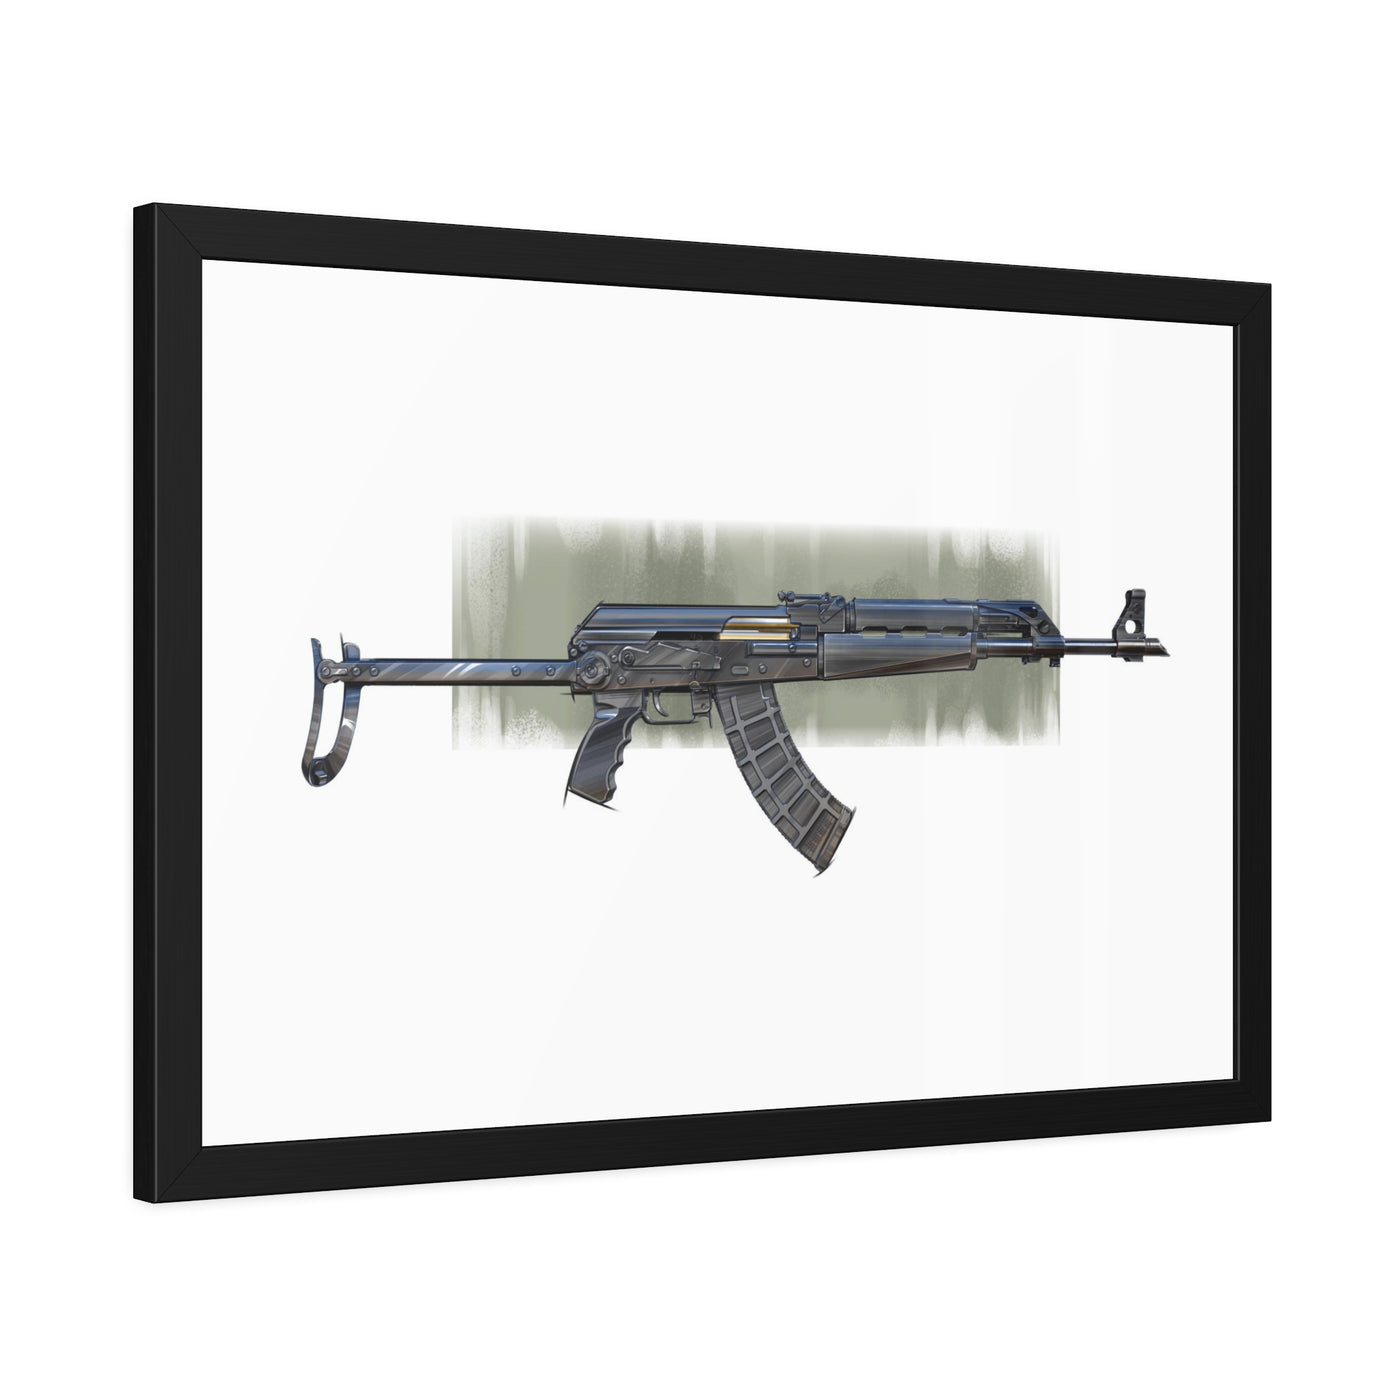 The Paratrooper / AK-47 Underfolder Painting - Black Frame - Value Collection